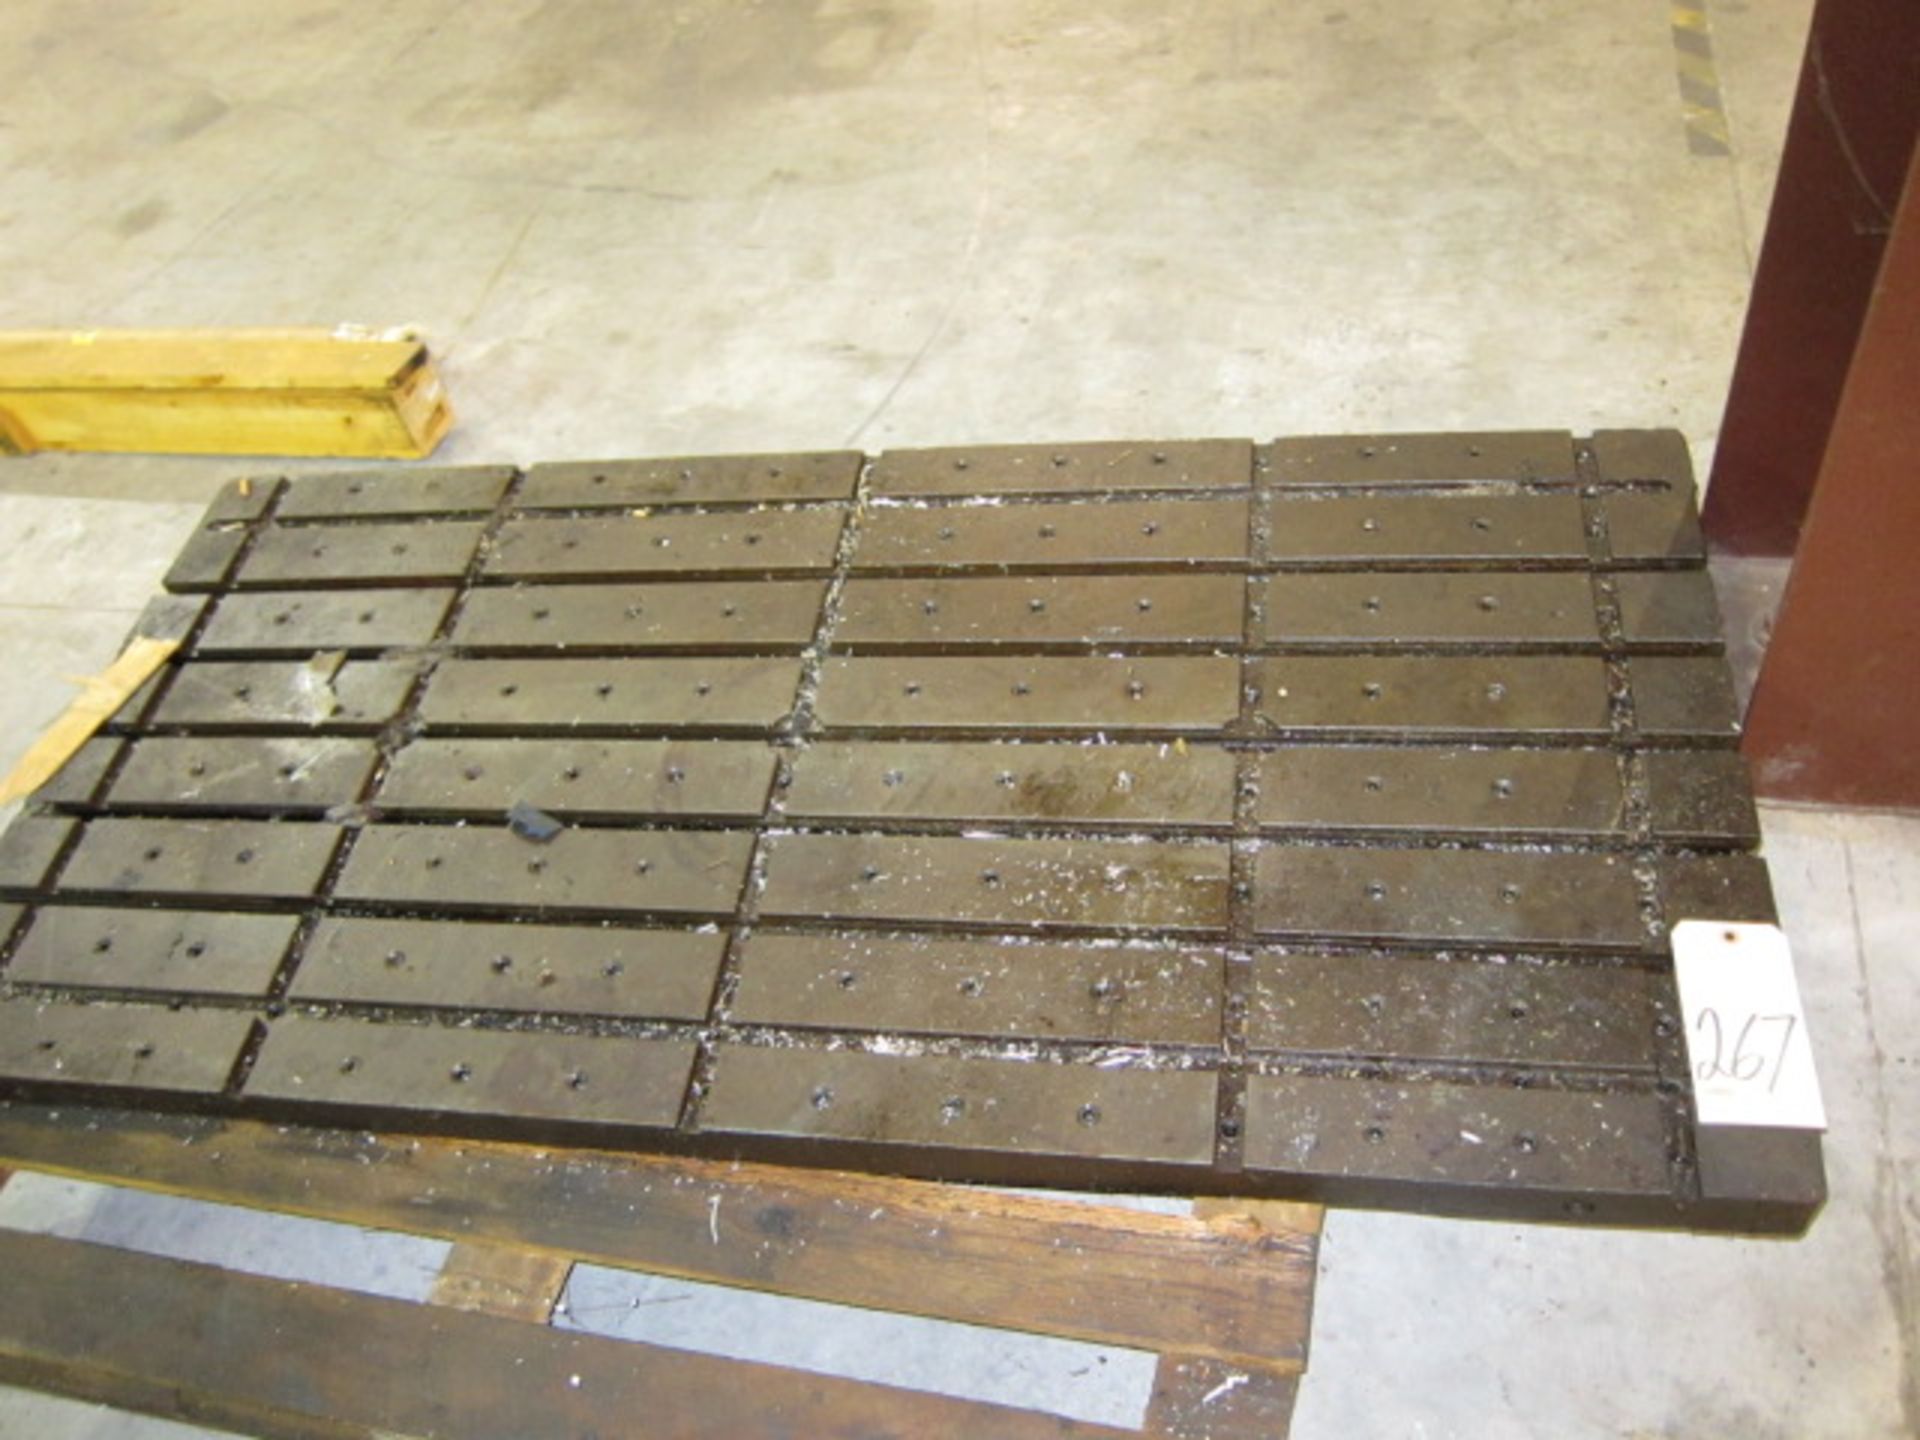 T-SLOTTED PLATE, 62" x 30" x 3-1/2"